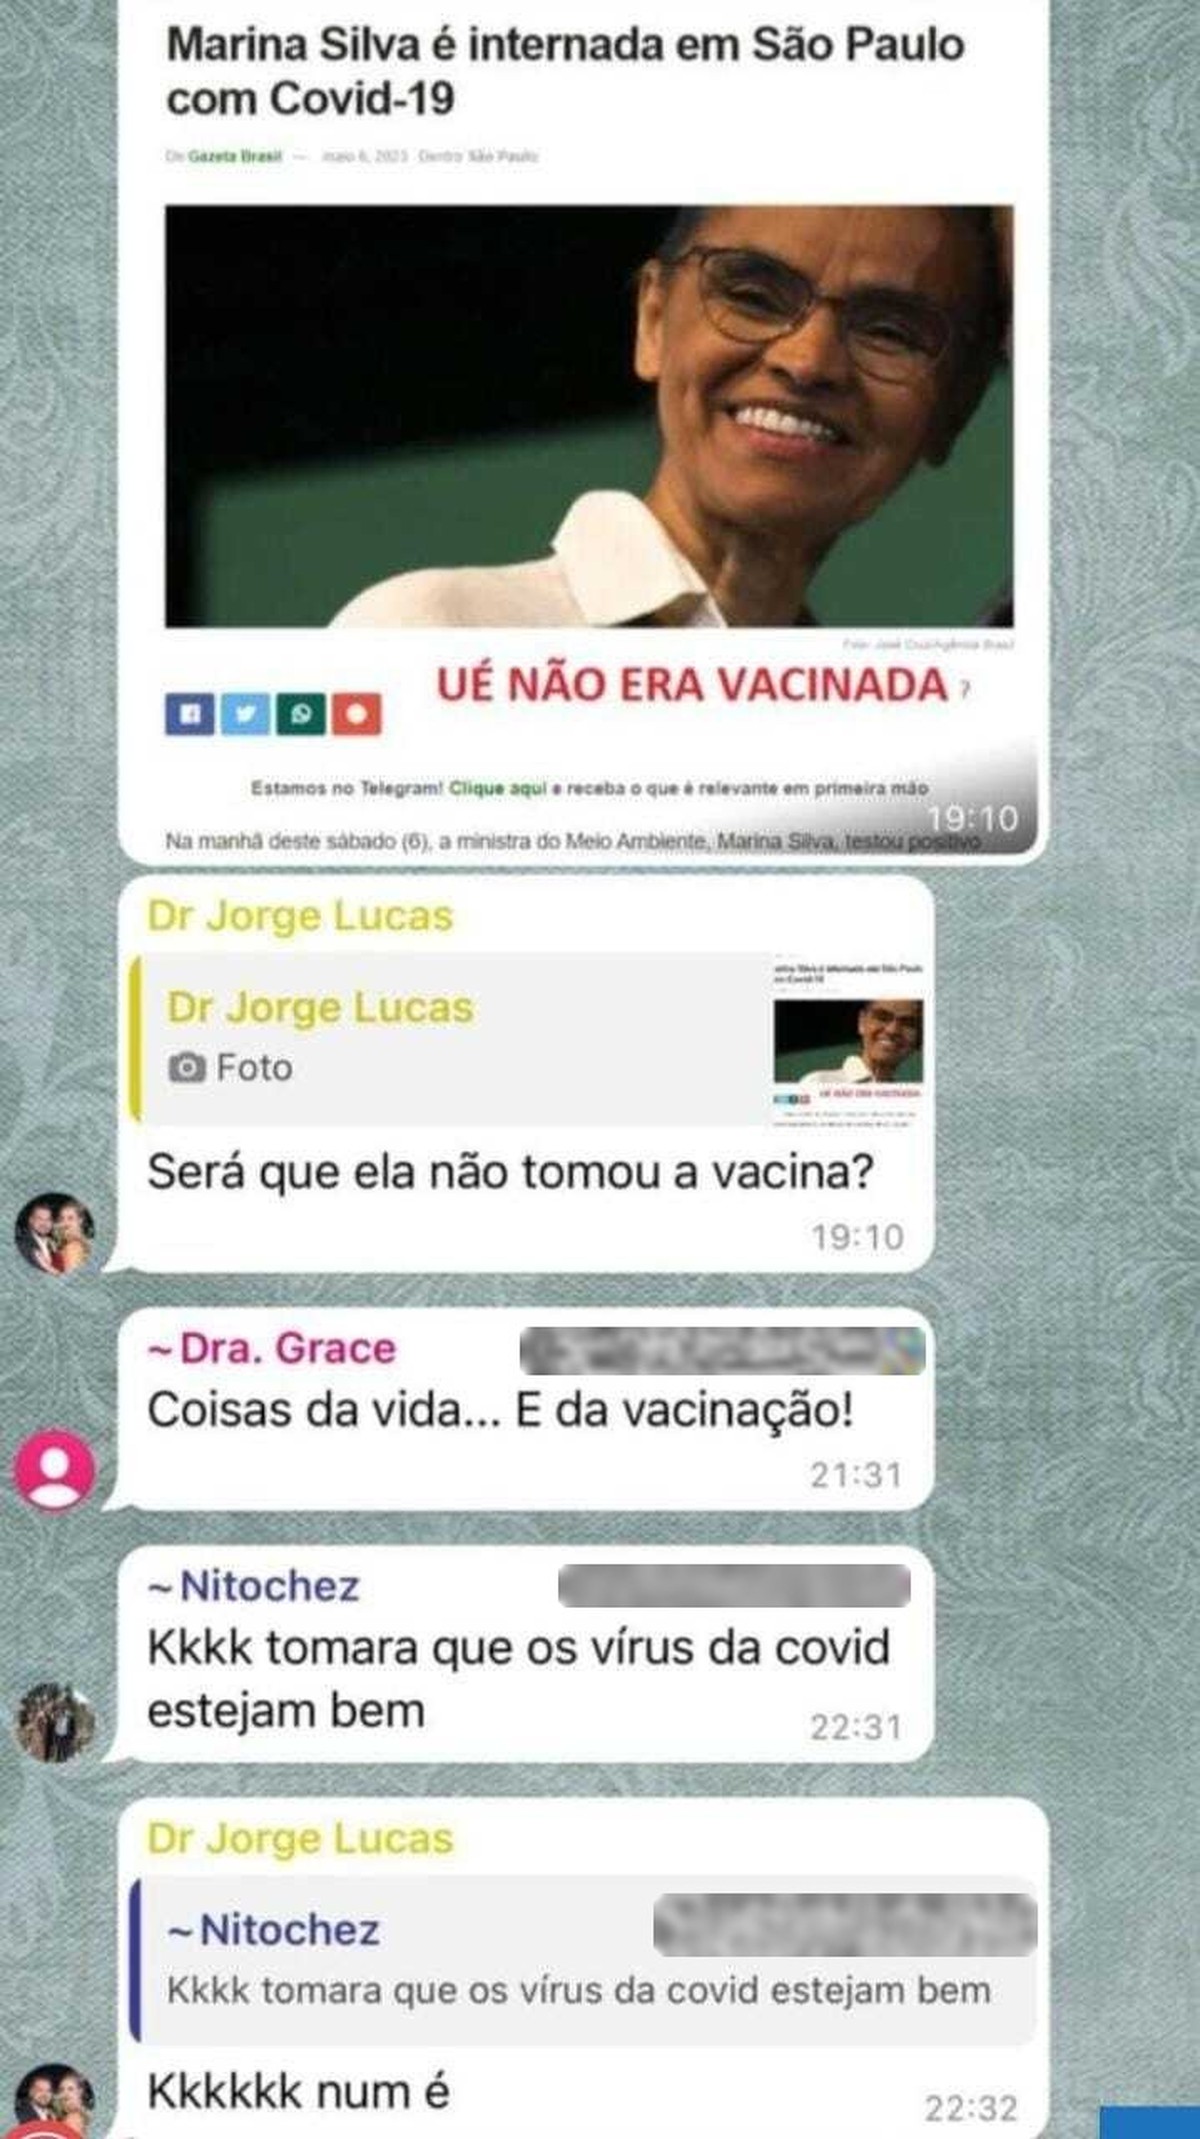 CRM-AC is investigating doctors who mocked Marina Silva’s health in leaked publications |  acre